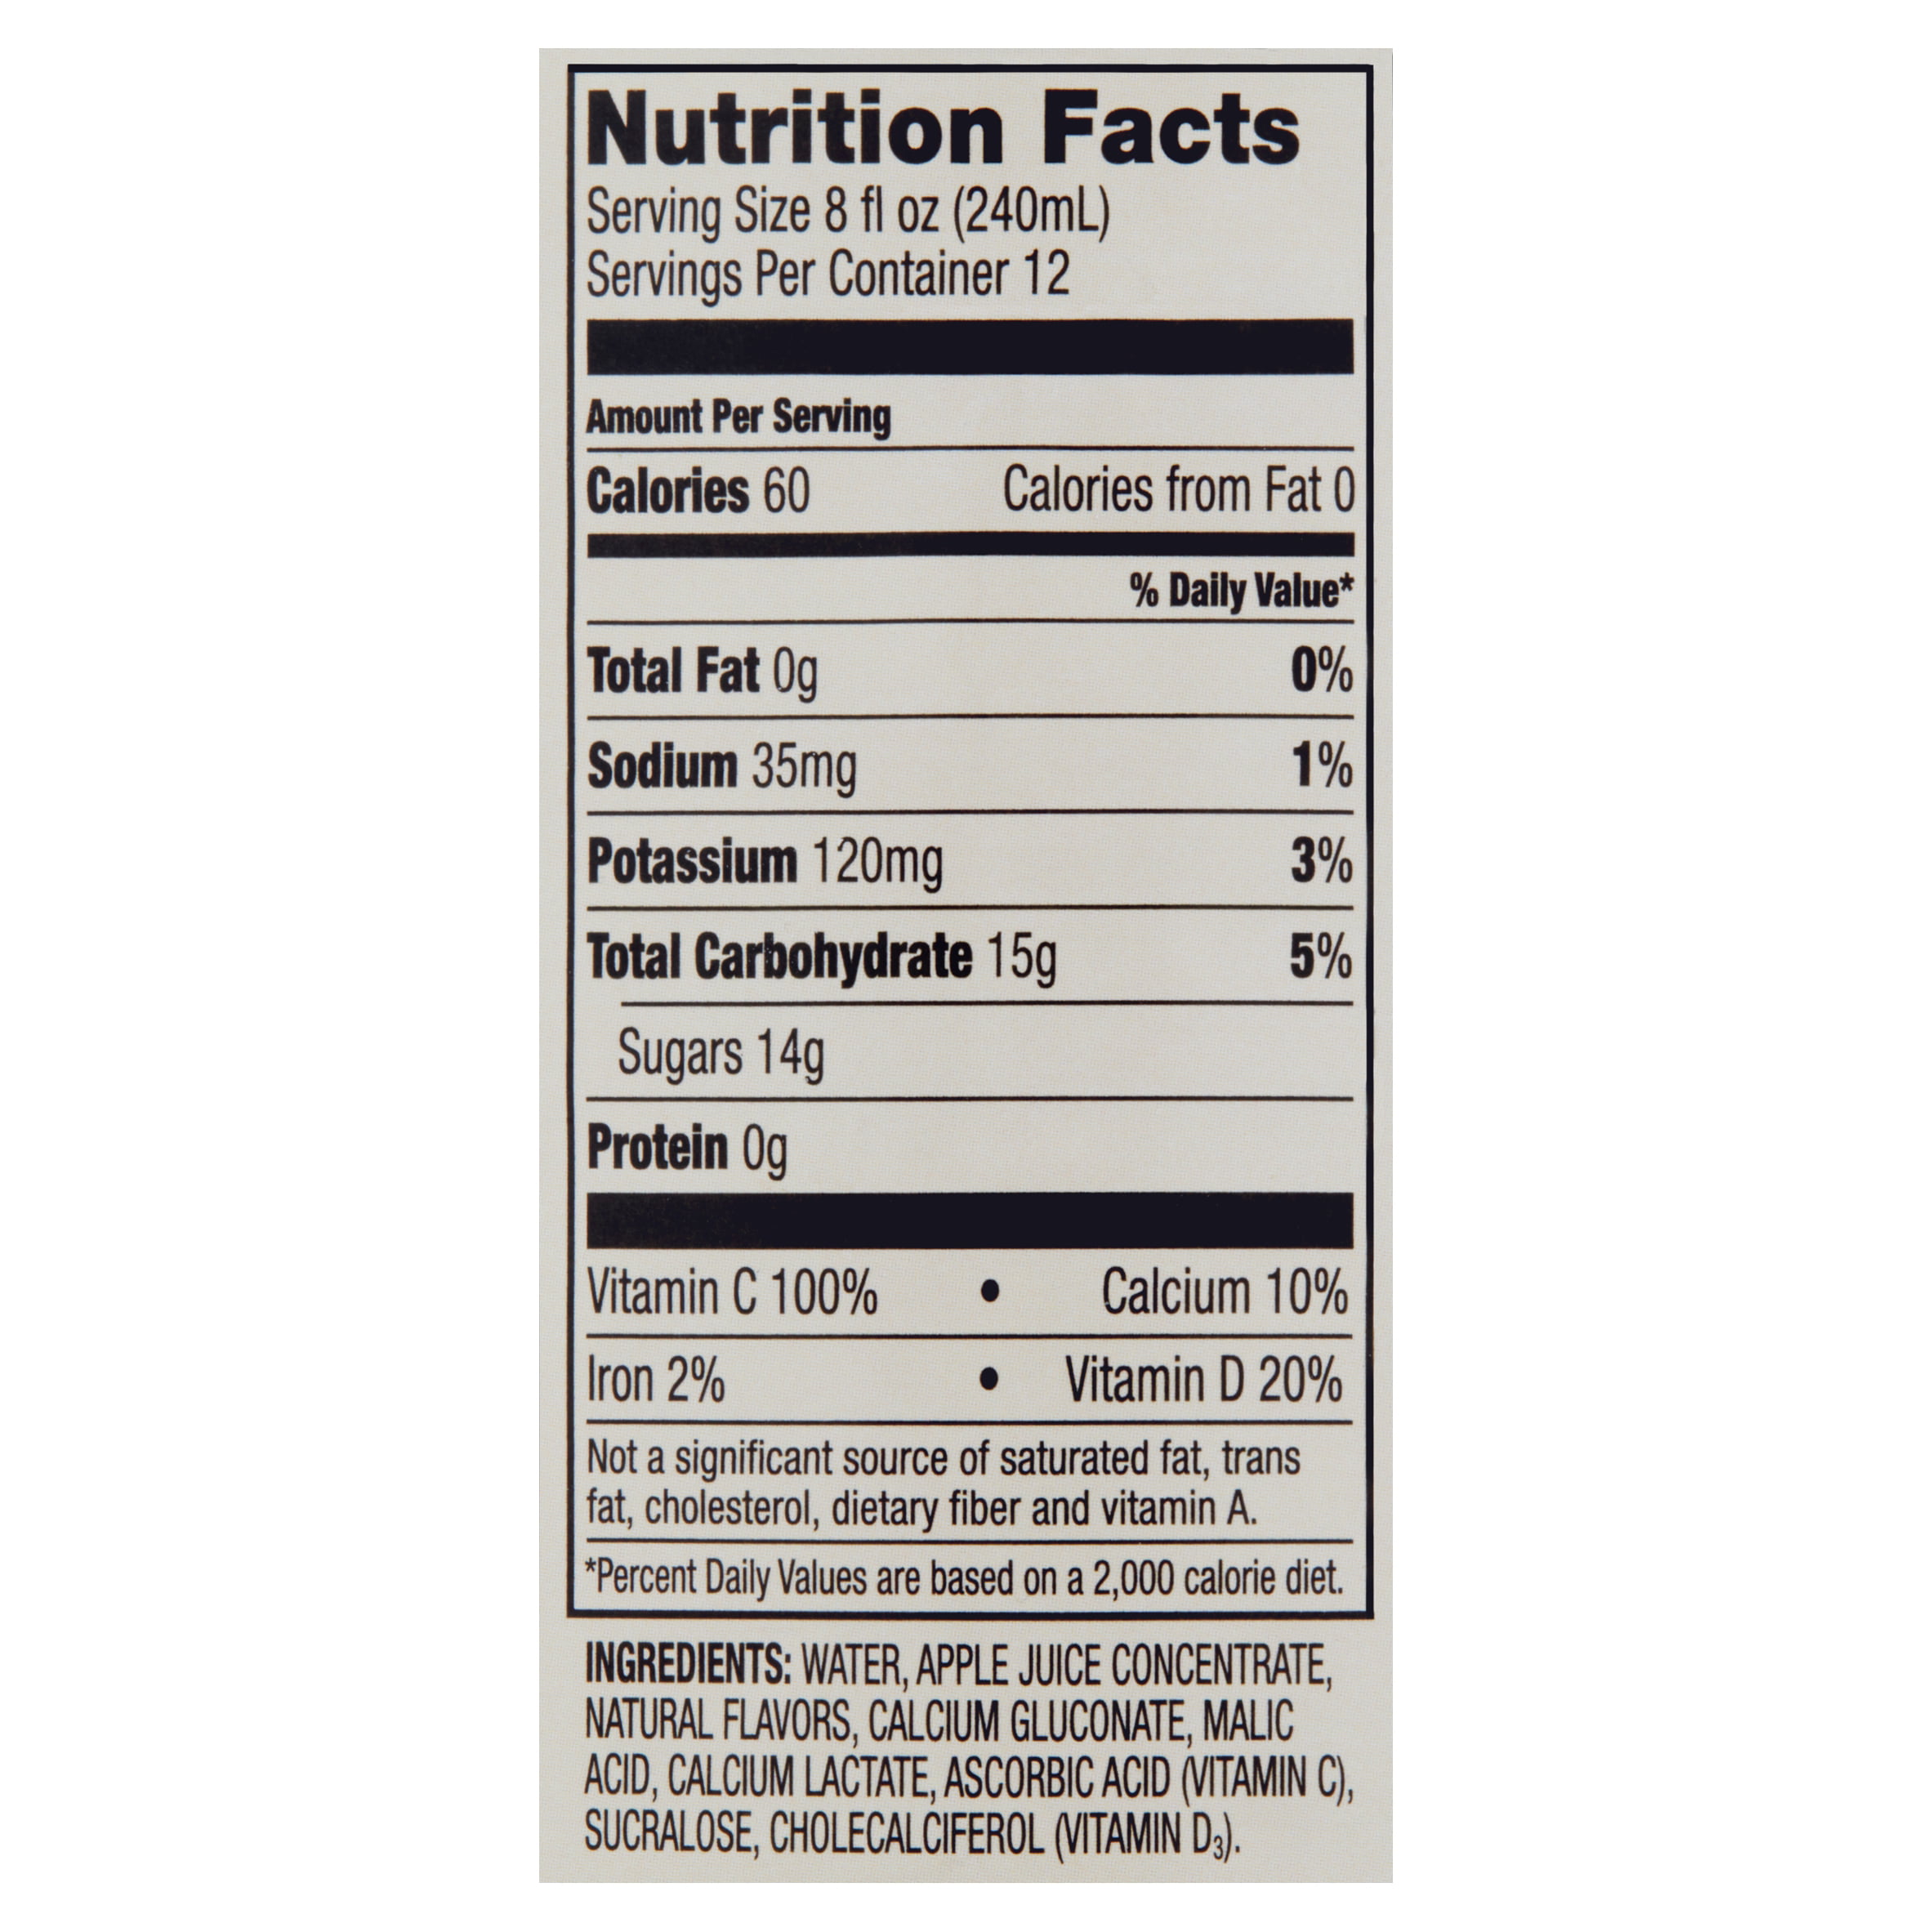 1 cup of apple juice nutrition facts